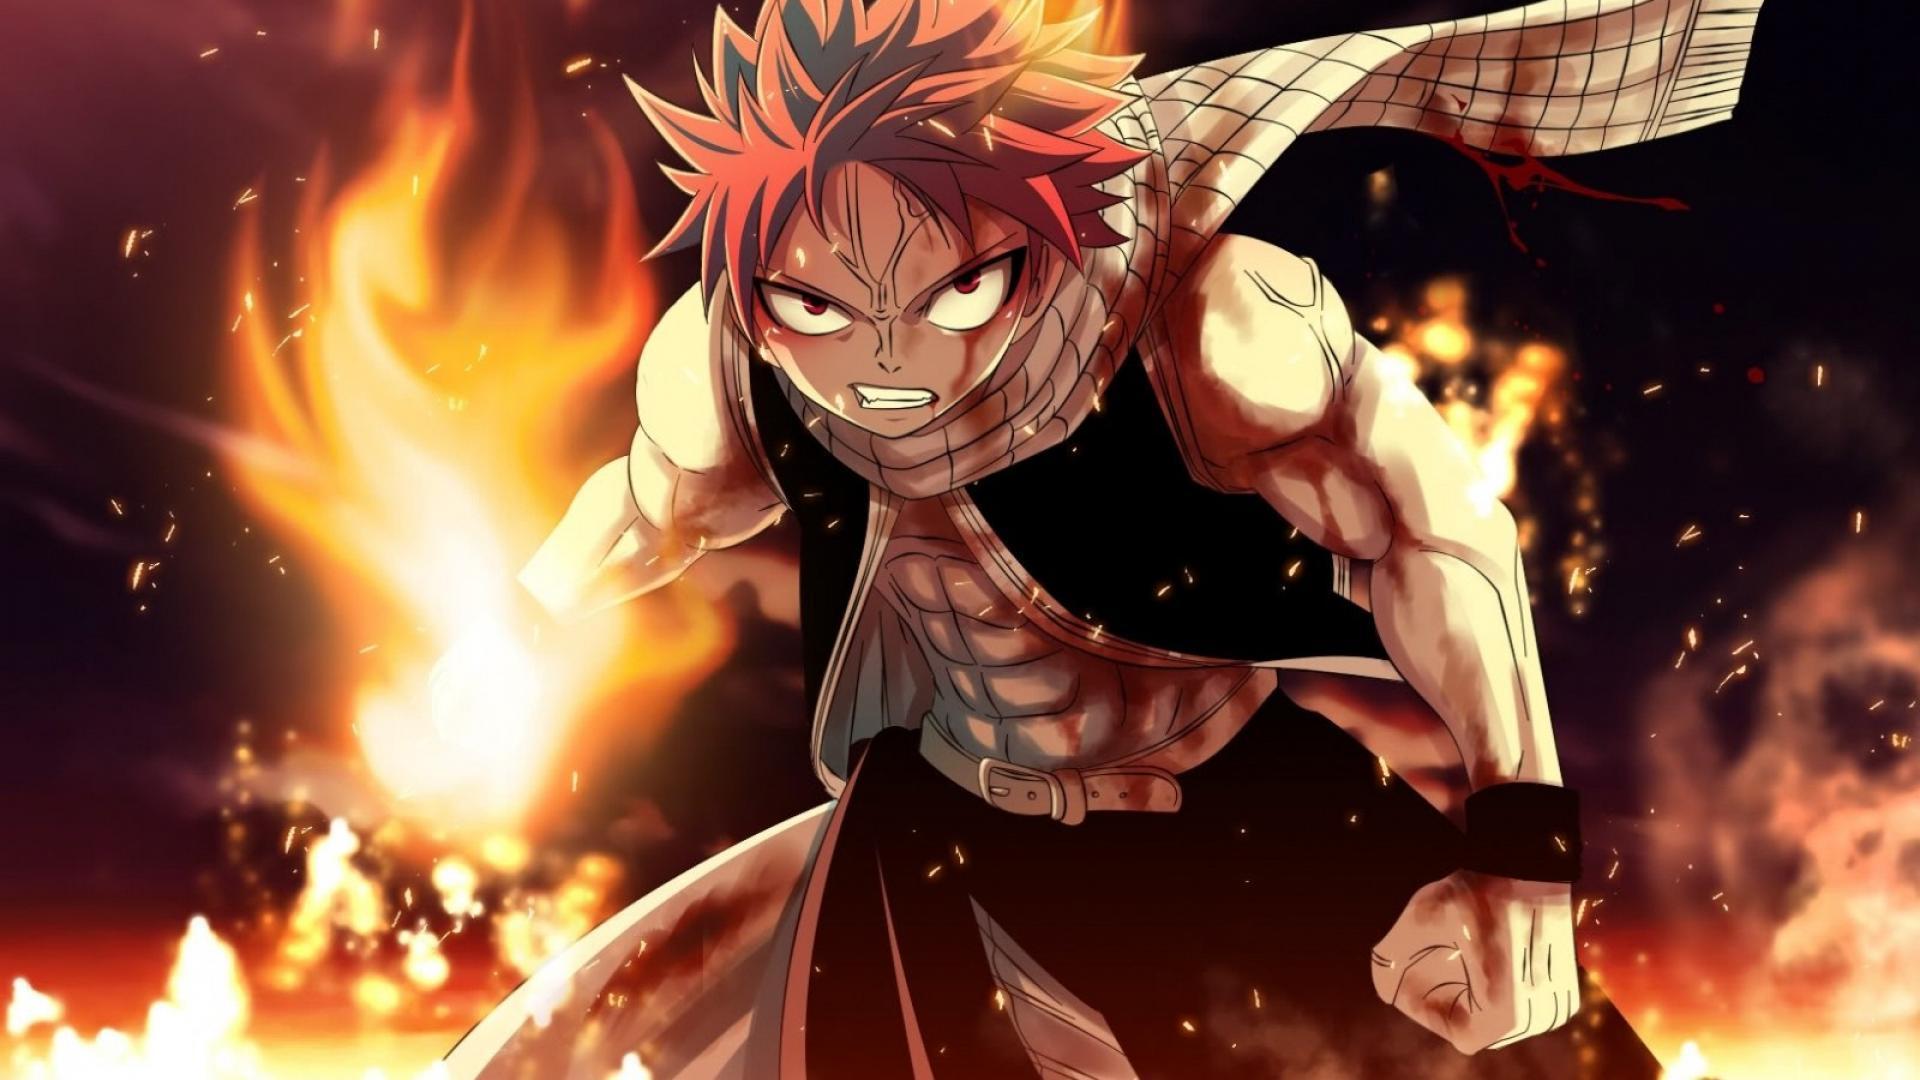 1920 x 1080 · jpeg - Fairy Tail 2015 Wallpapers HD - Wallpaper Cave